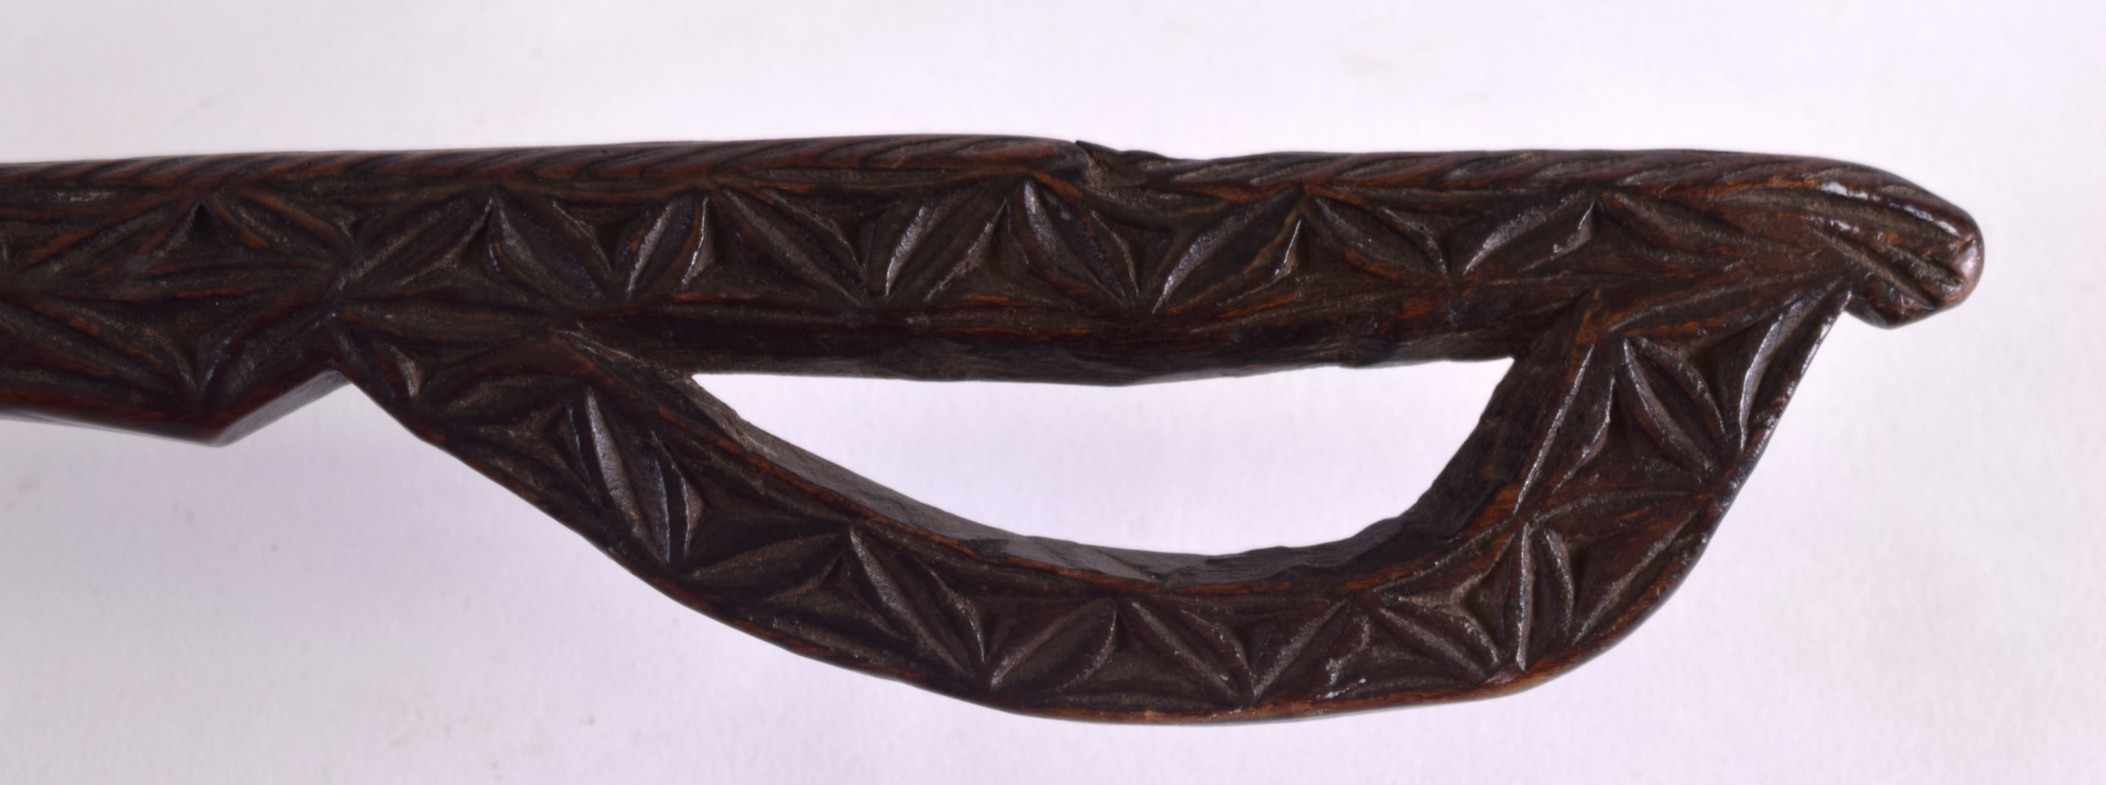 A LATE 19TH CENTURY AFRICAN TRIBAL CARVED WOOD SPOON with engraved terminal. 54 cm long. - Bild 3 aus 3